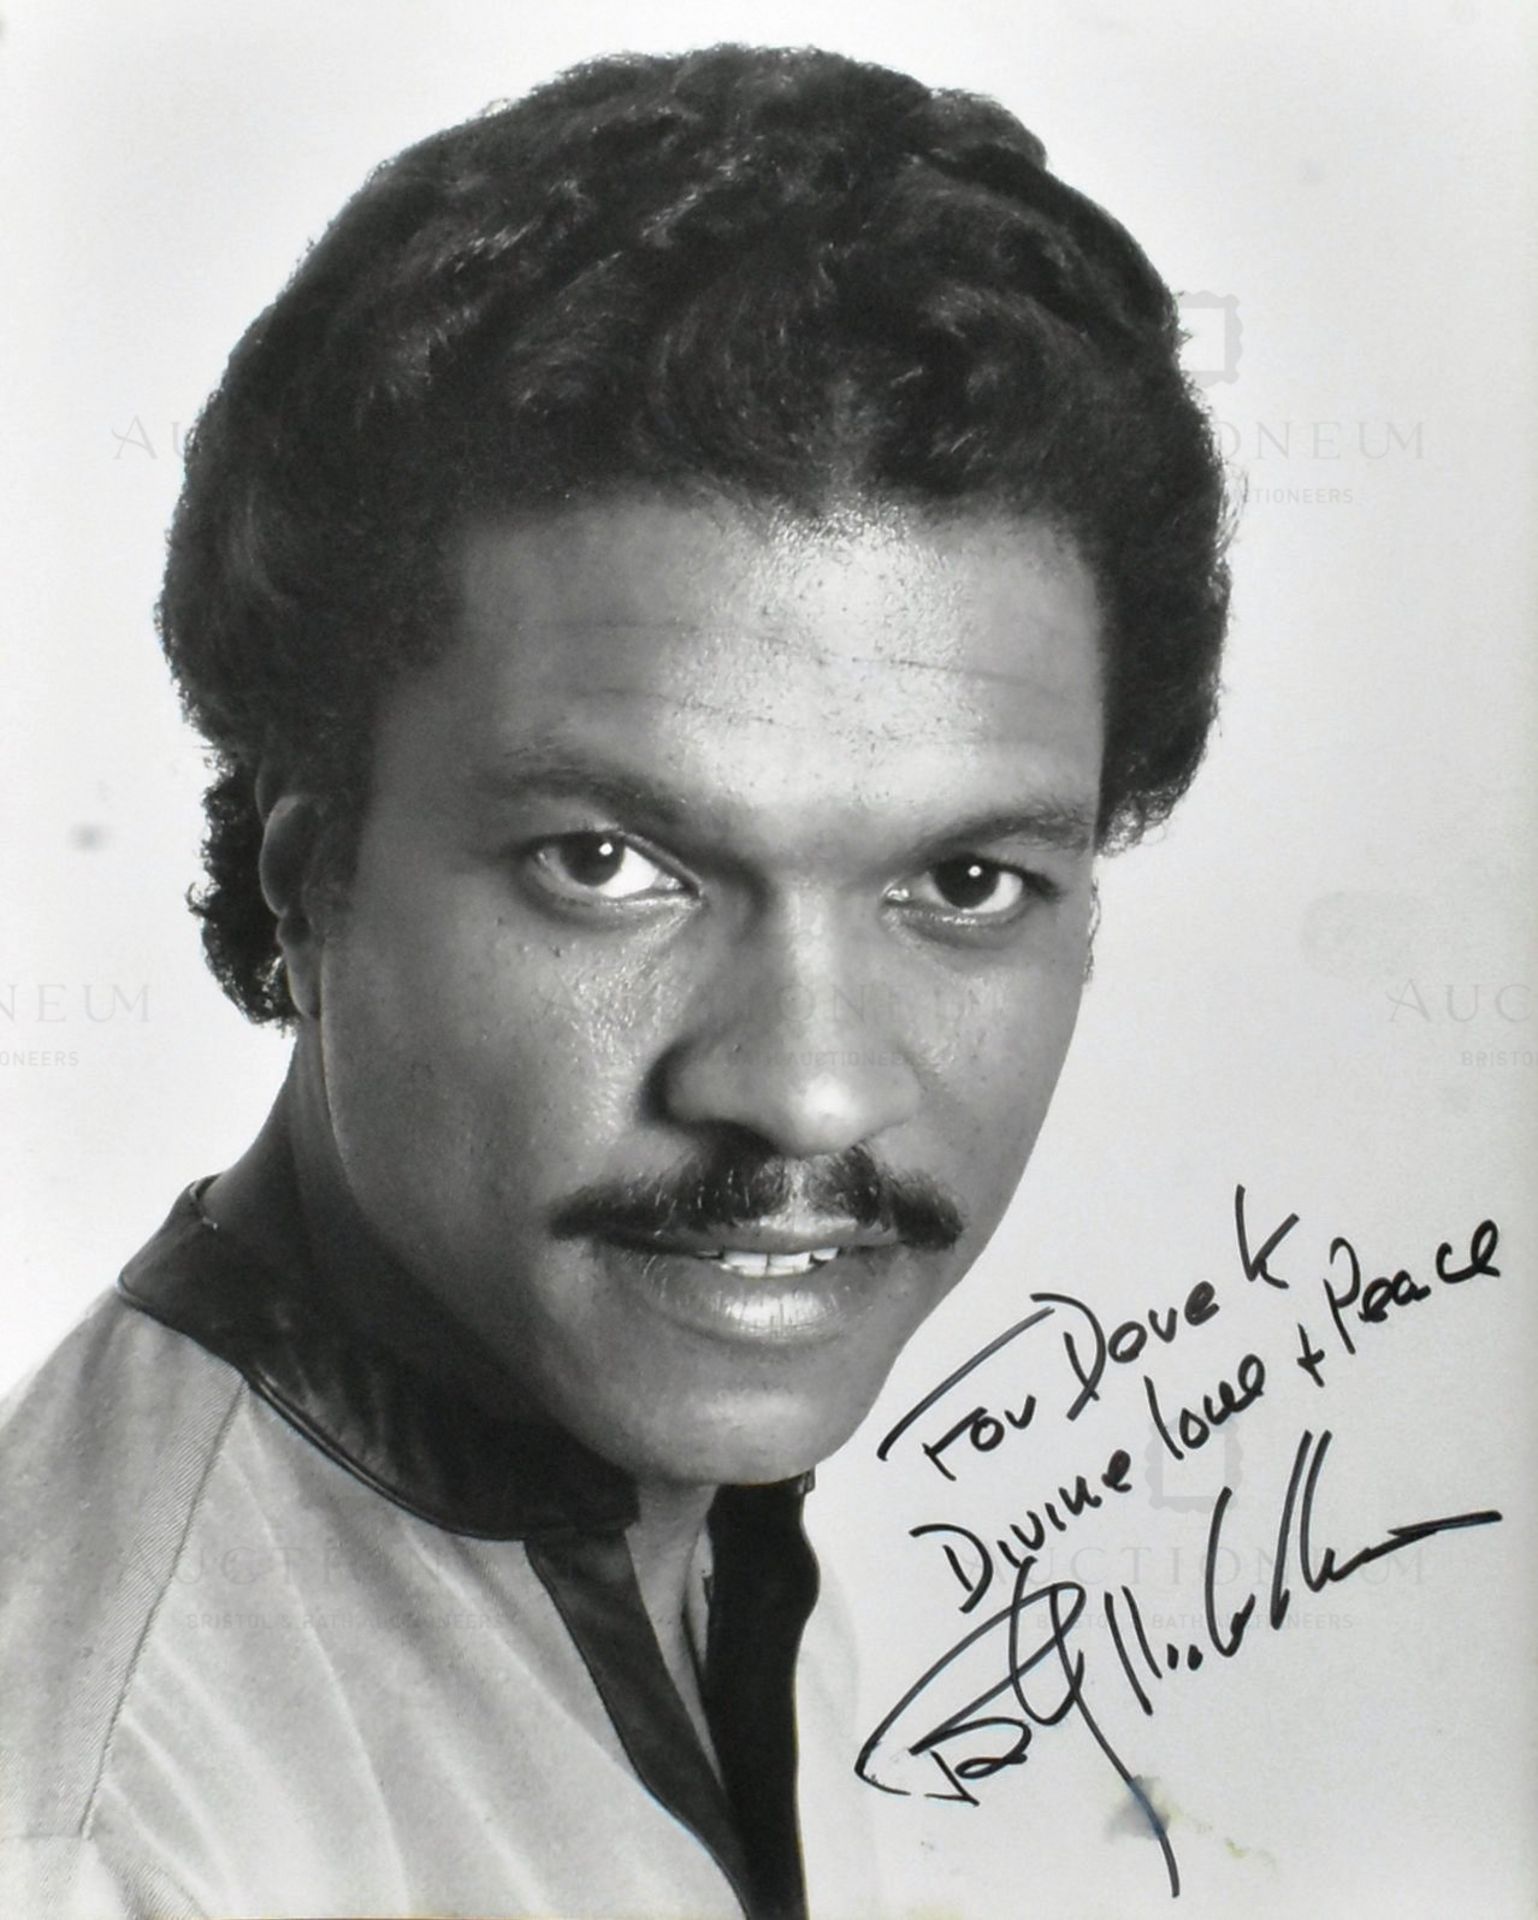 STAR WARS - BILLY DEE WILLIAMS - SIGNED PHOTO TO ASST. DIRECTOR